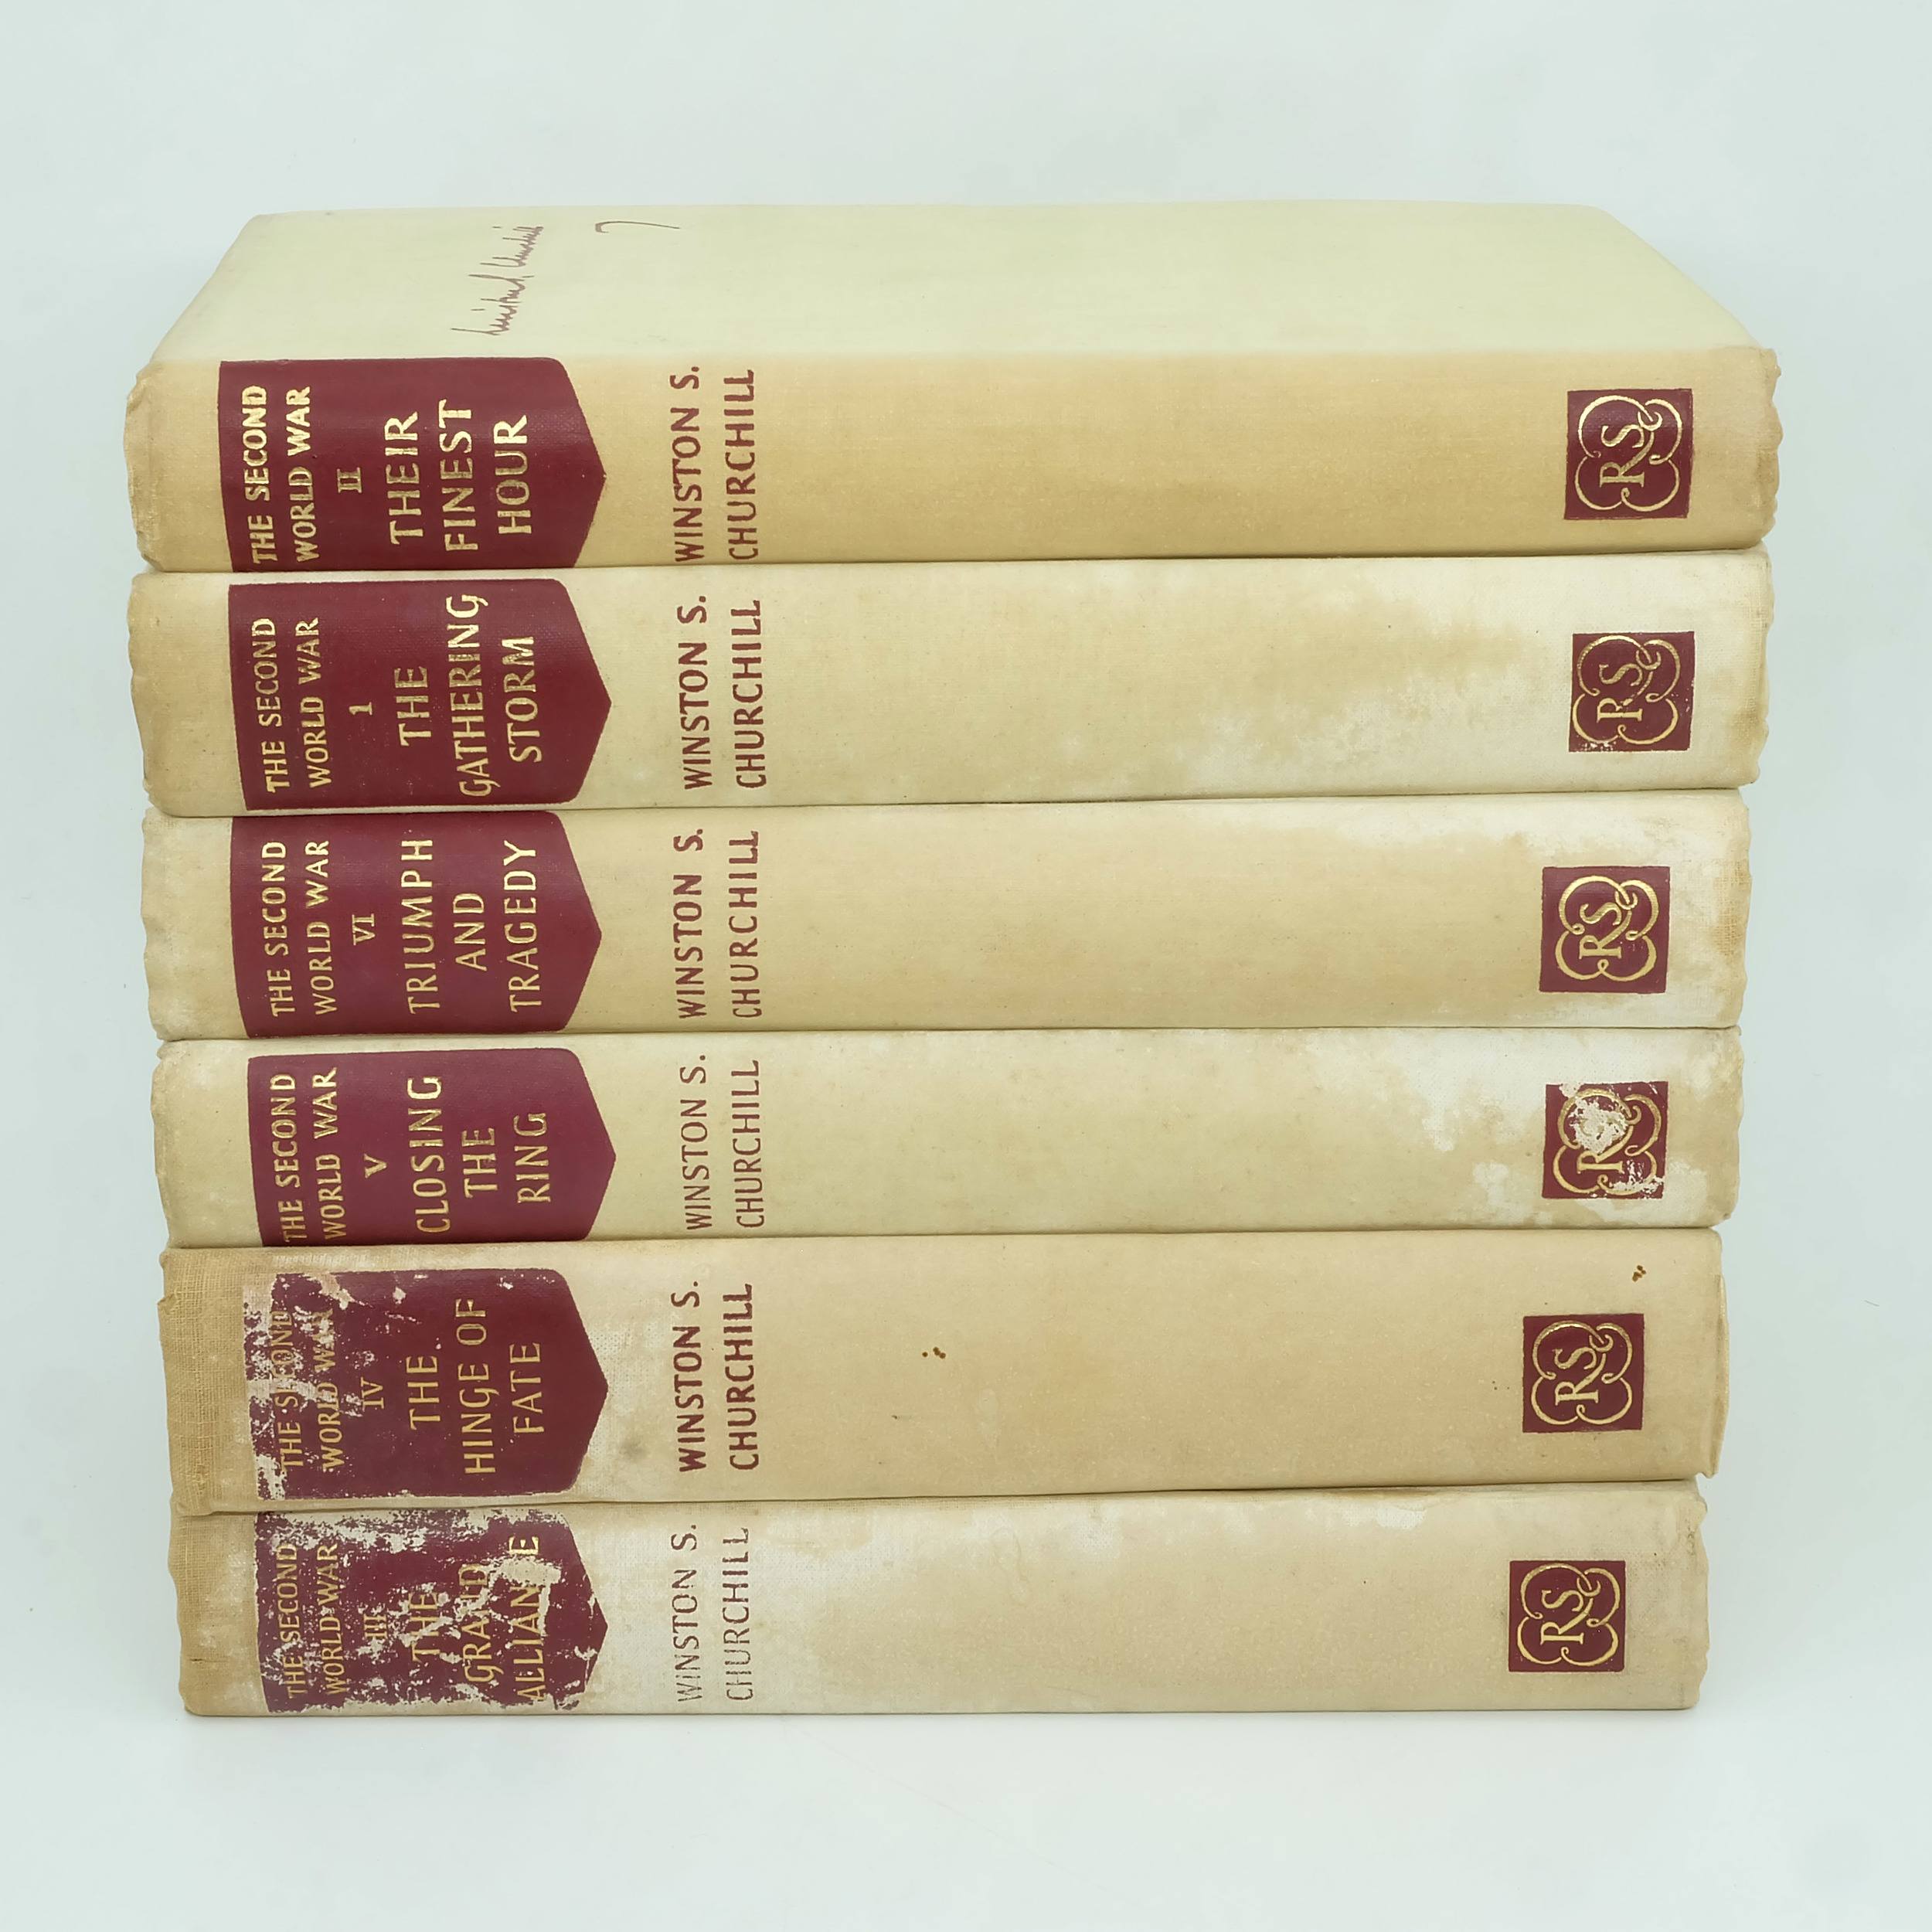 'Six Volumes of Winston Churchill The Second World War, The Gathering Storm, Their Finest Hour, The Grand Alliance, The Hinge of Fate, Closing the Ring and Triumph and Tragedy The Reprint Society London 1956'